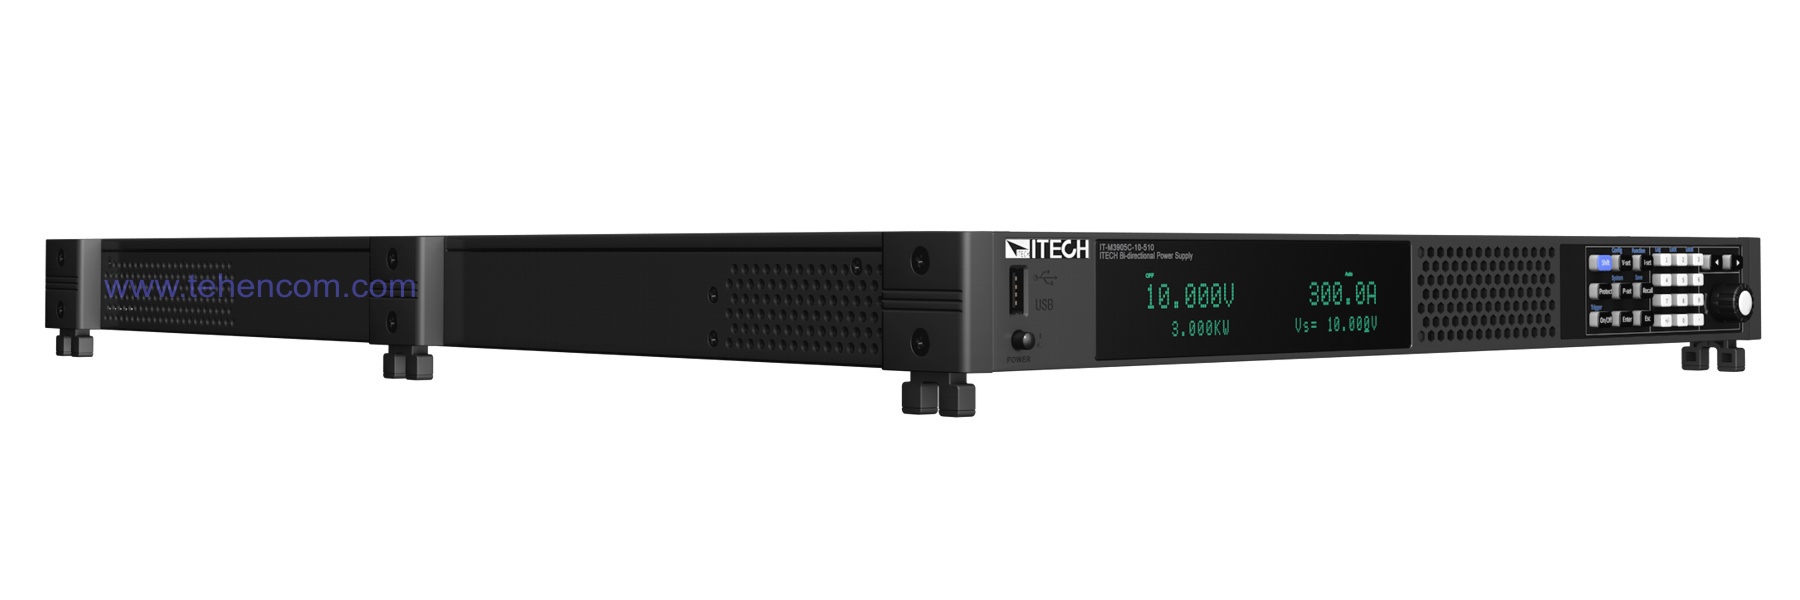 Typical ITECH IT-M3900C series power supply (1U height, side view 1)